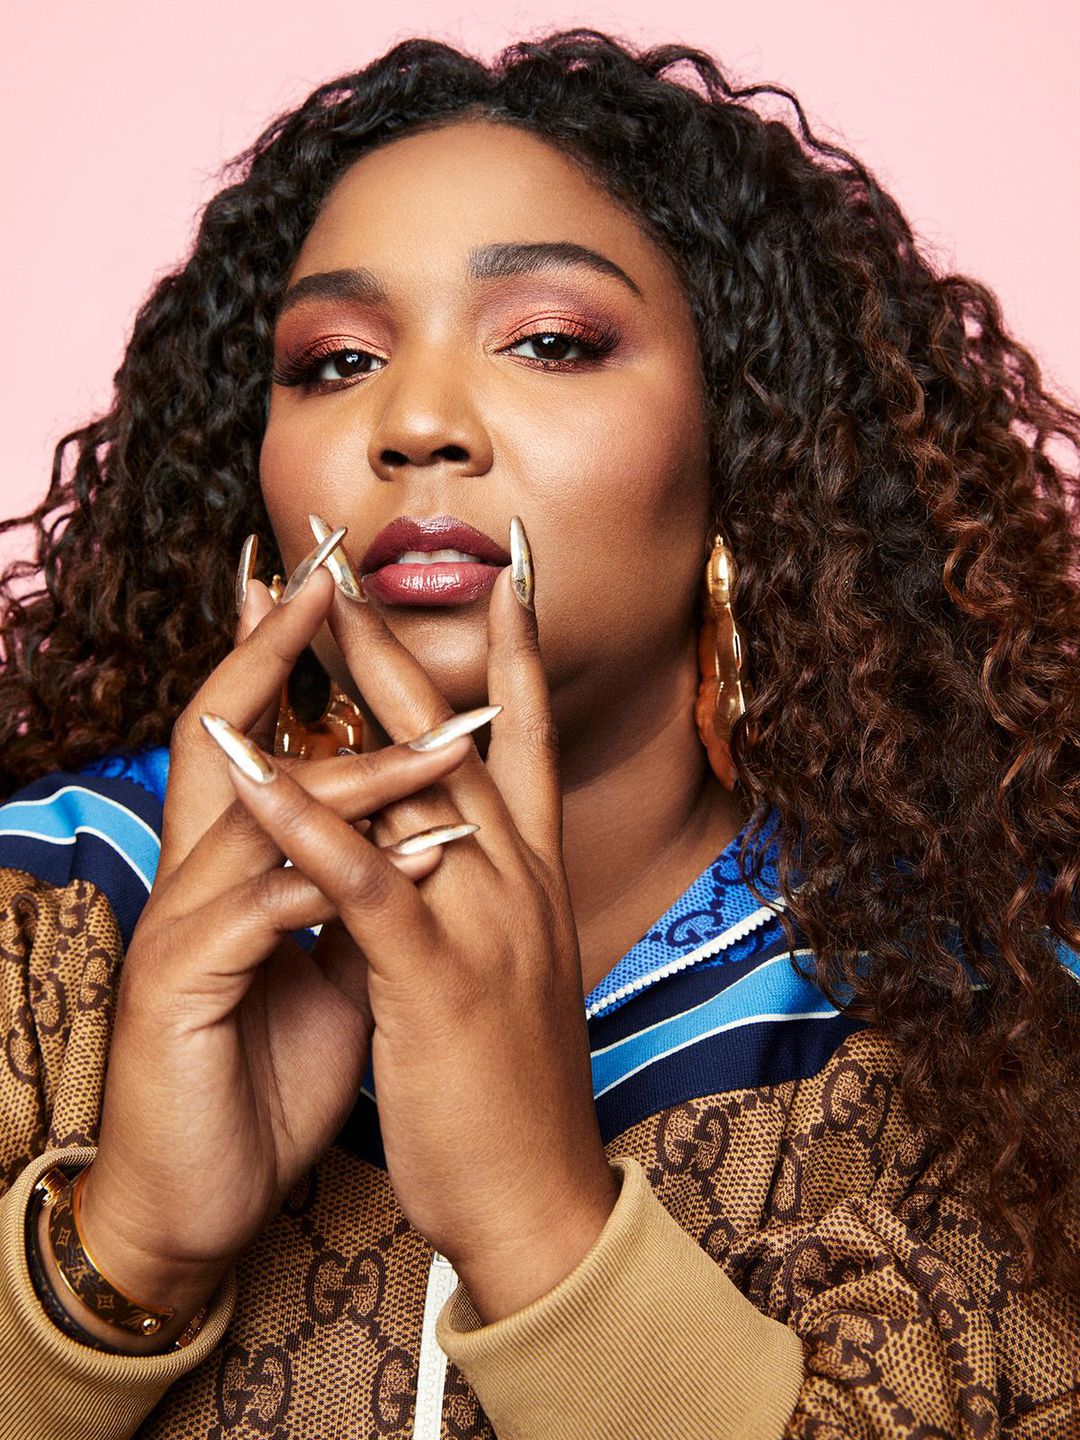 Lizzo does she have kids